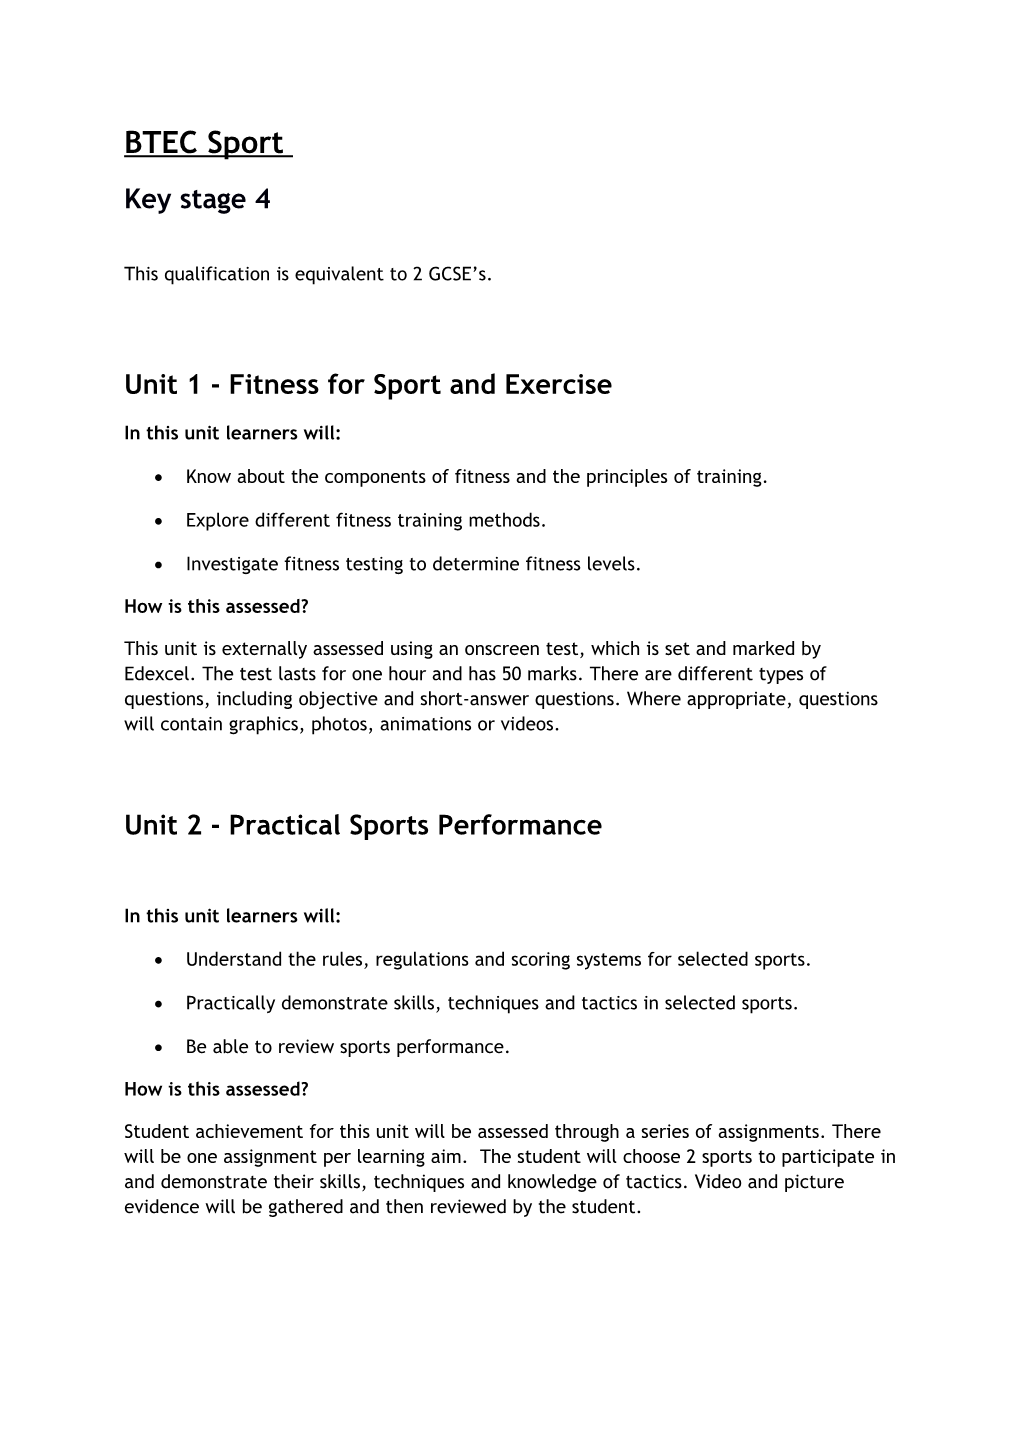 Unit 1 - Fitness for Sport and Exercise